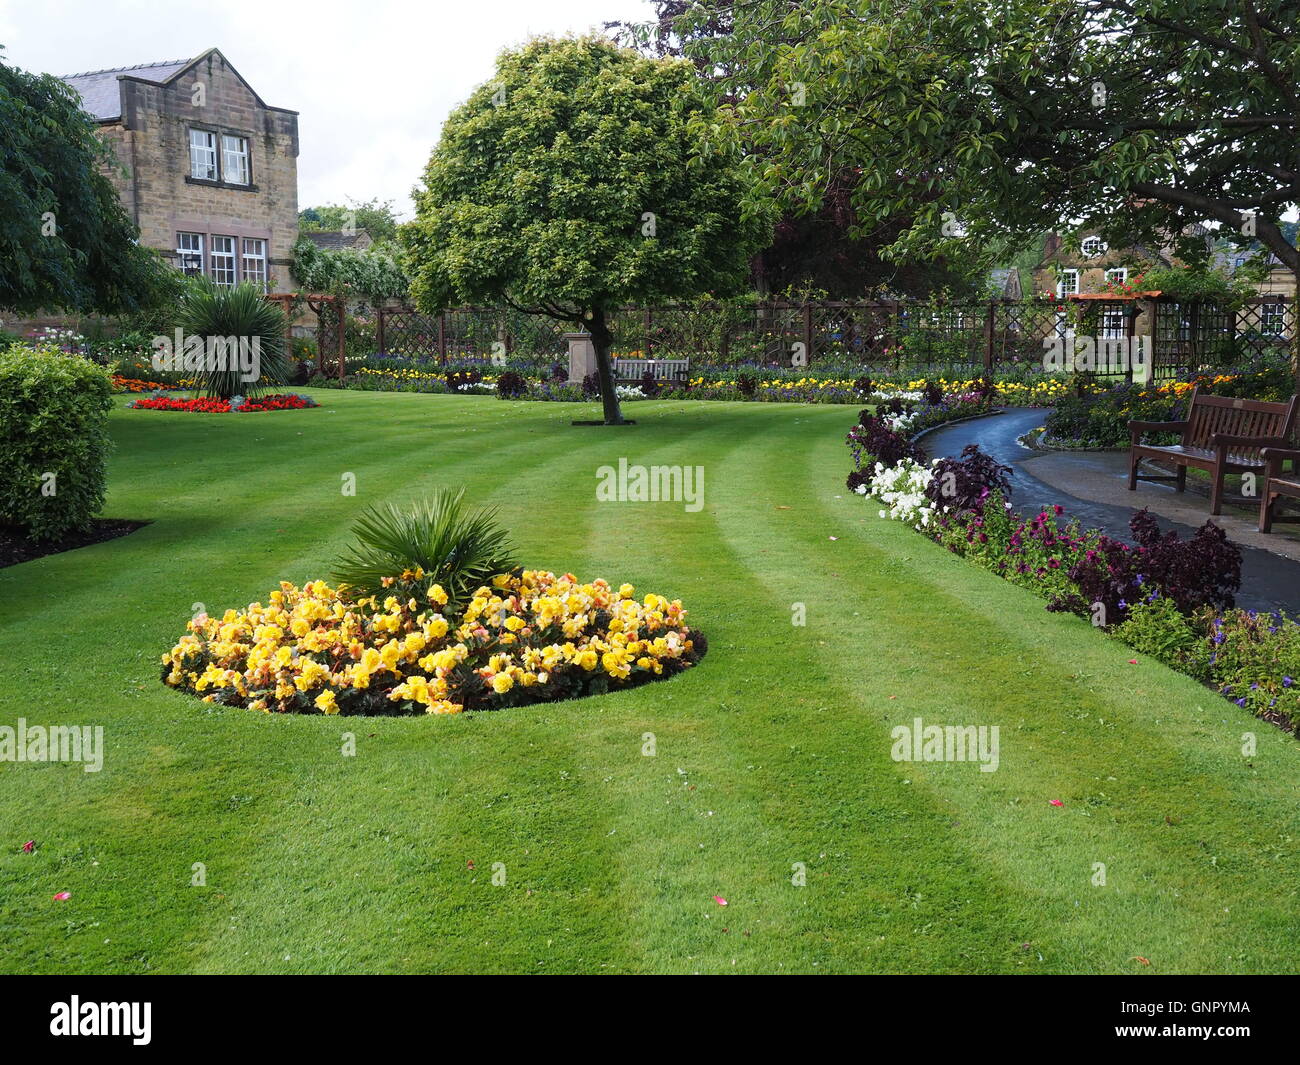 A view of a public garden in Bakewell Derbyshire England Stock Photo